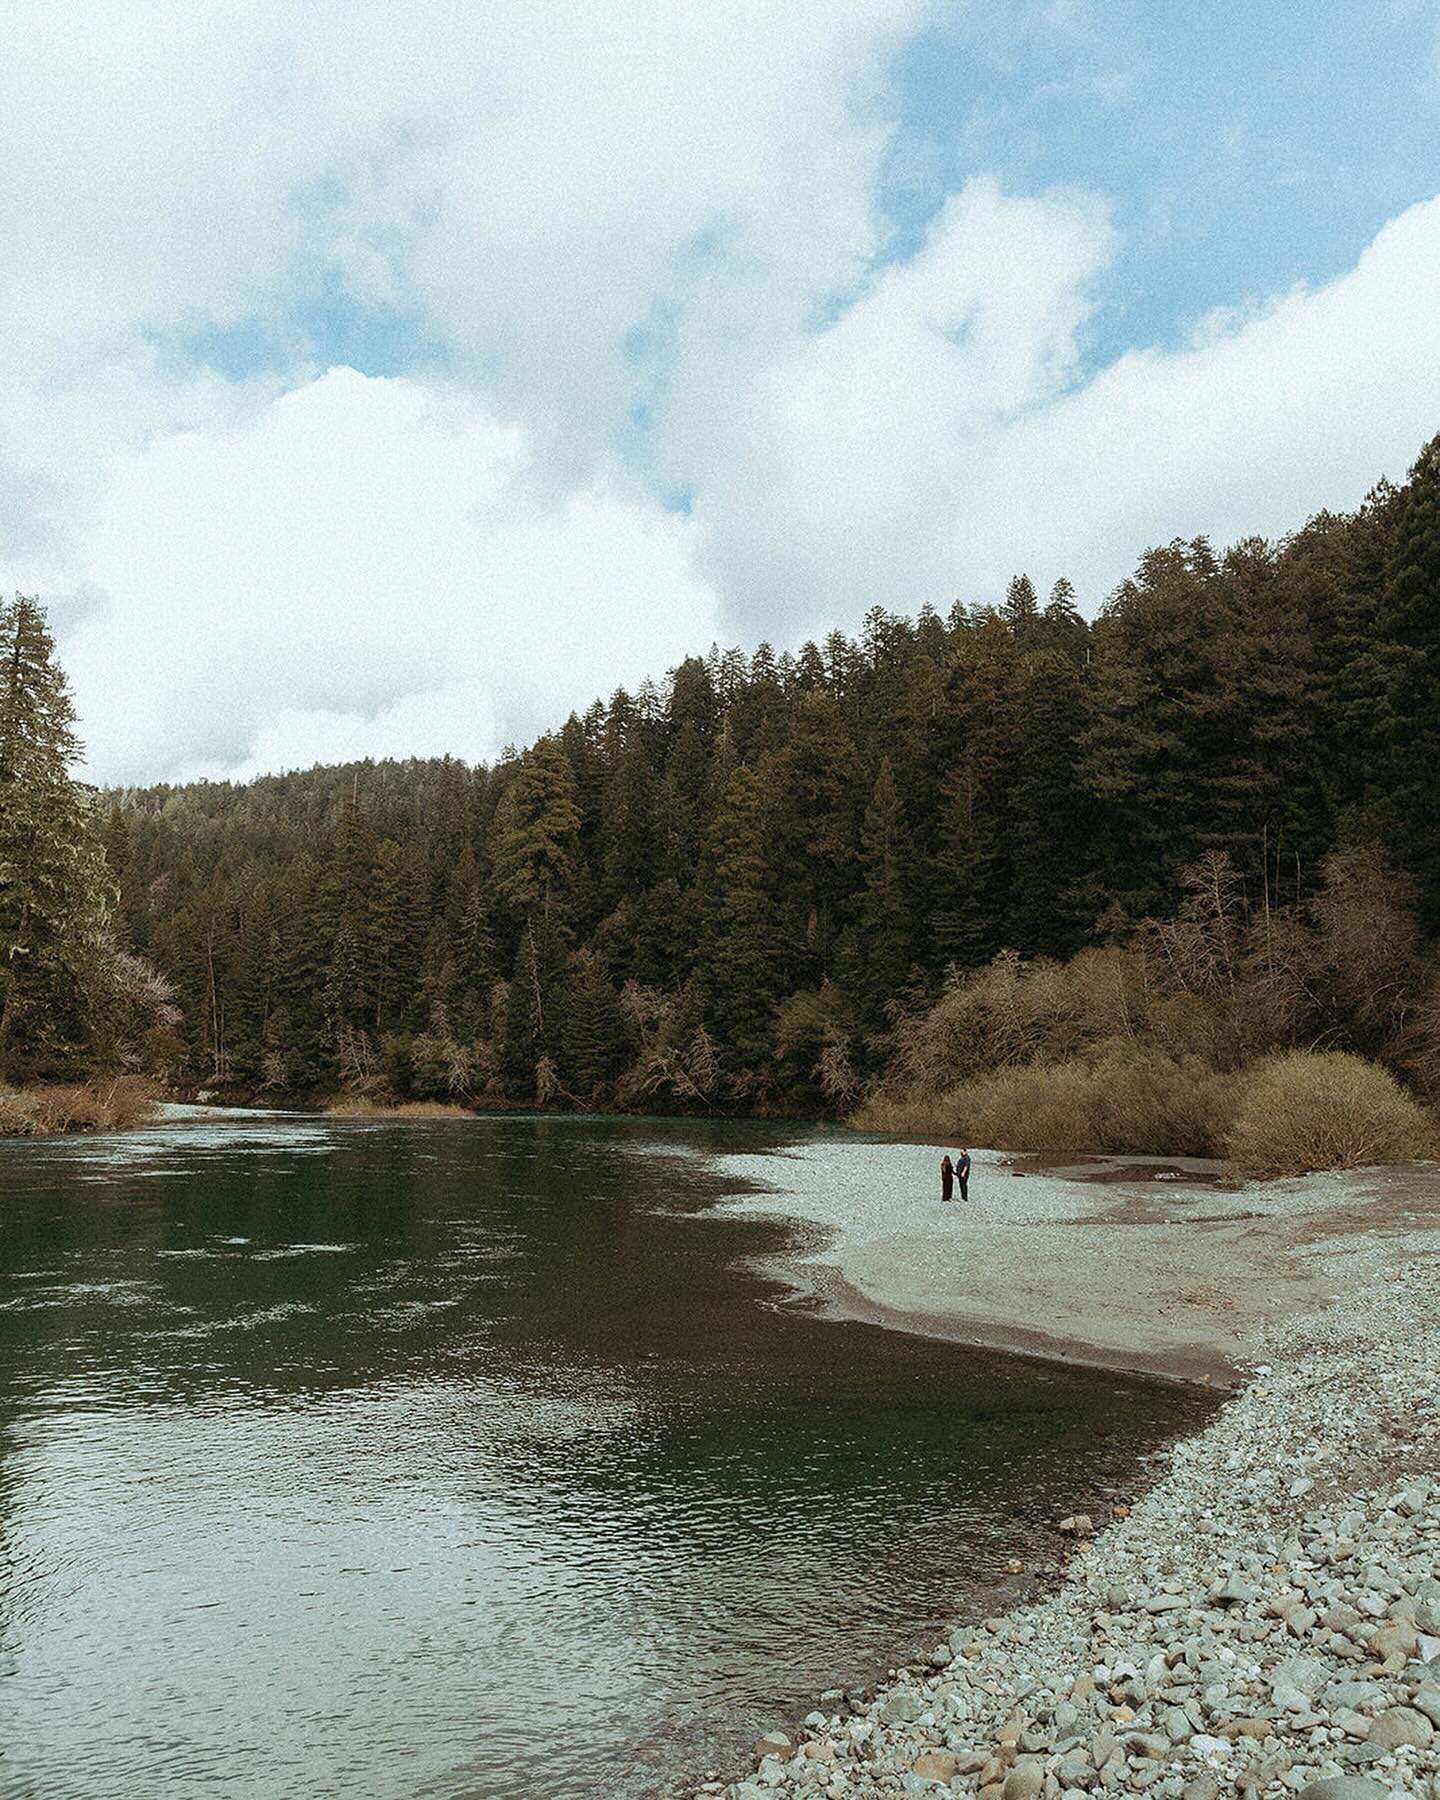 Renewing nostalgia by revisiting their proposal spot &amp; capturing their current love. This level of sentiment makes my heart so full.

〰️ 

#jedediahsmithstatepark #redwoodstatepark #crecentcity #smithriver #brookingsoregon